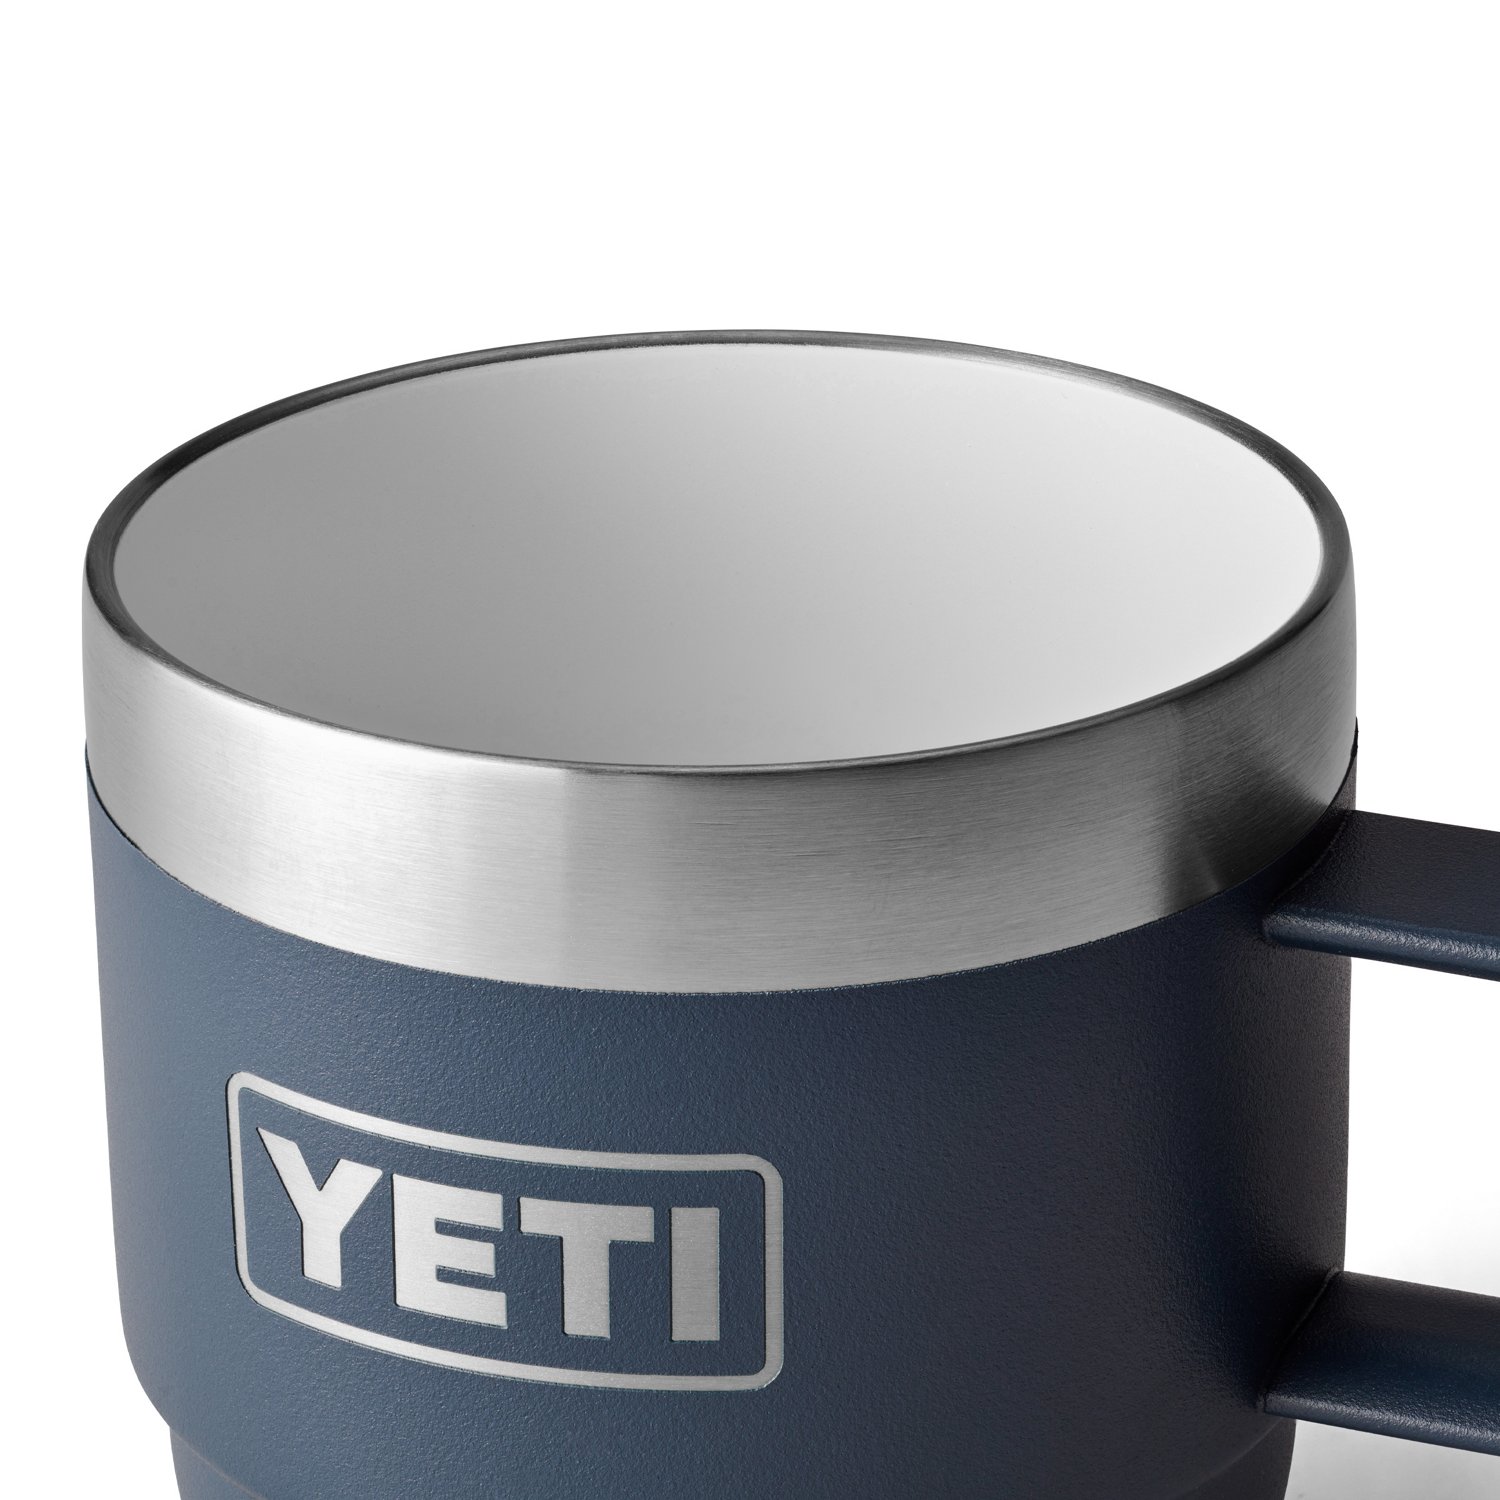 https://academy.scene7.com/is/image/academy//drinkware/yeti-rambler-6-oz-espresso-mugs-2-pack-21071501864-blue/9977e119993849599fec092adc87cddd?$pdp-mobile-gallery-ng$